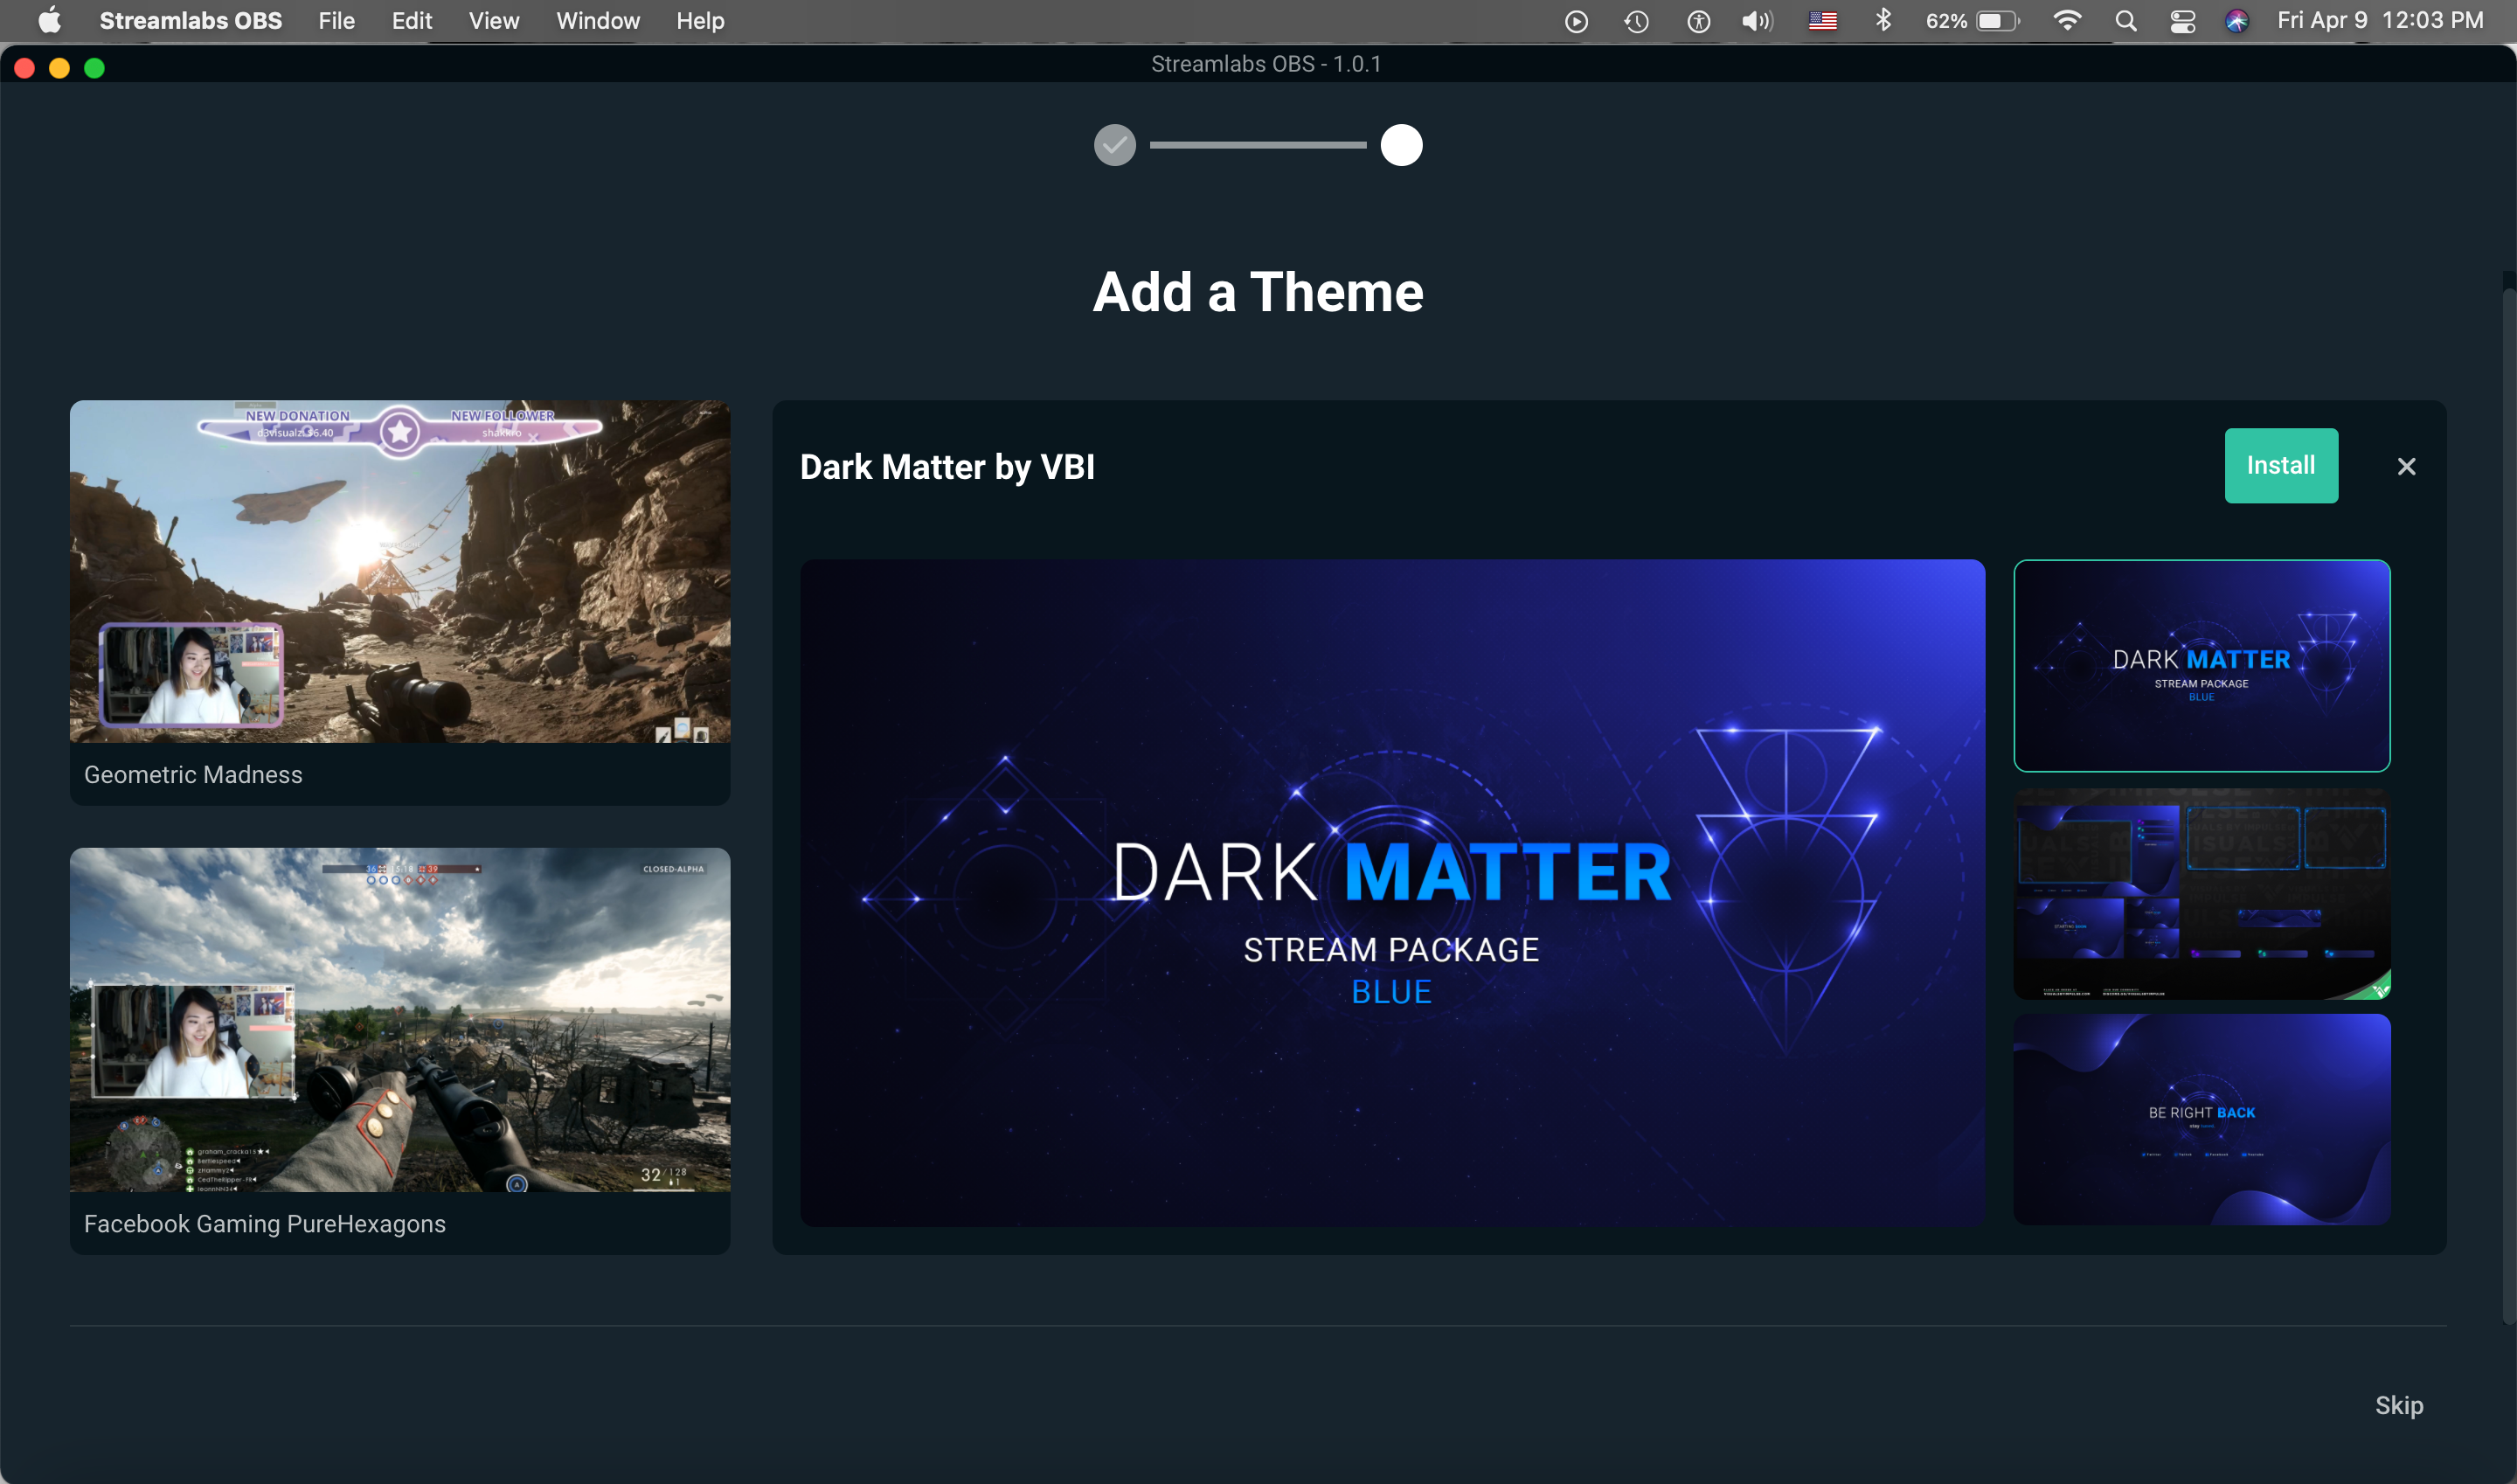 The overlay/theme selection page on Streamlabs OBS on a MacBook Pro